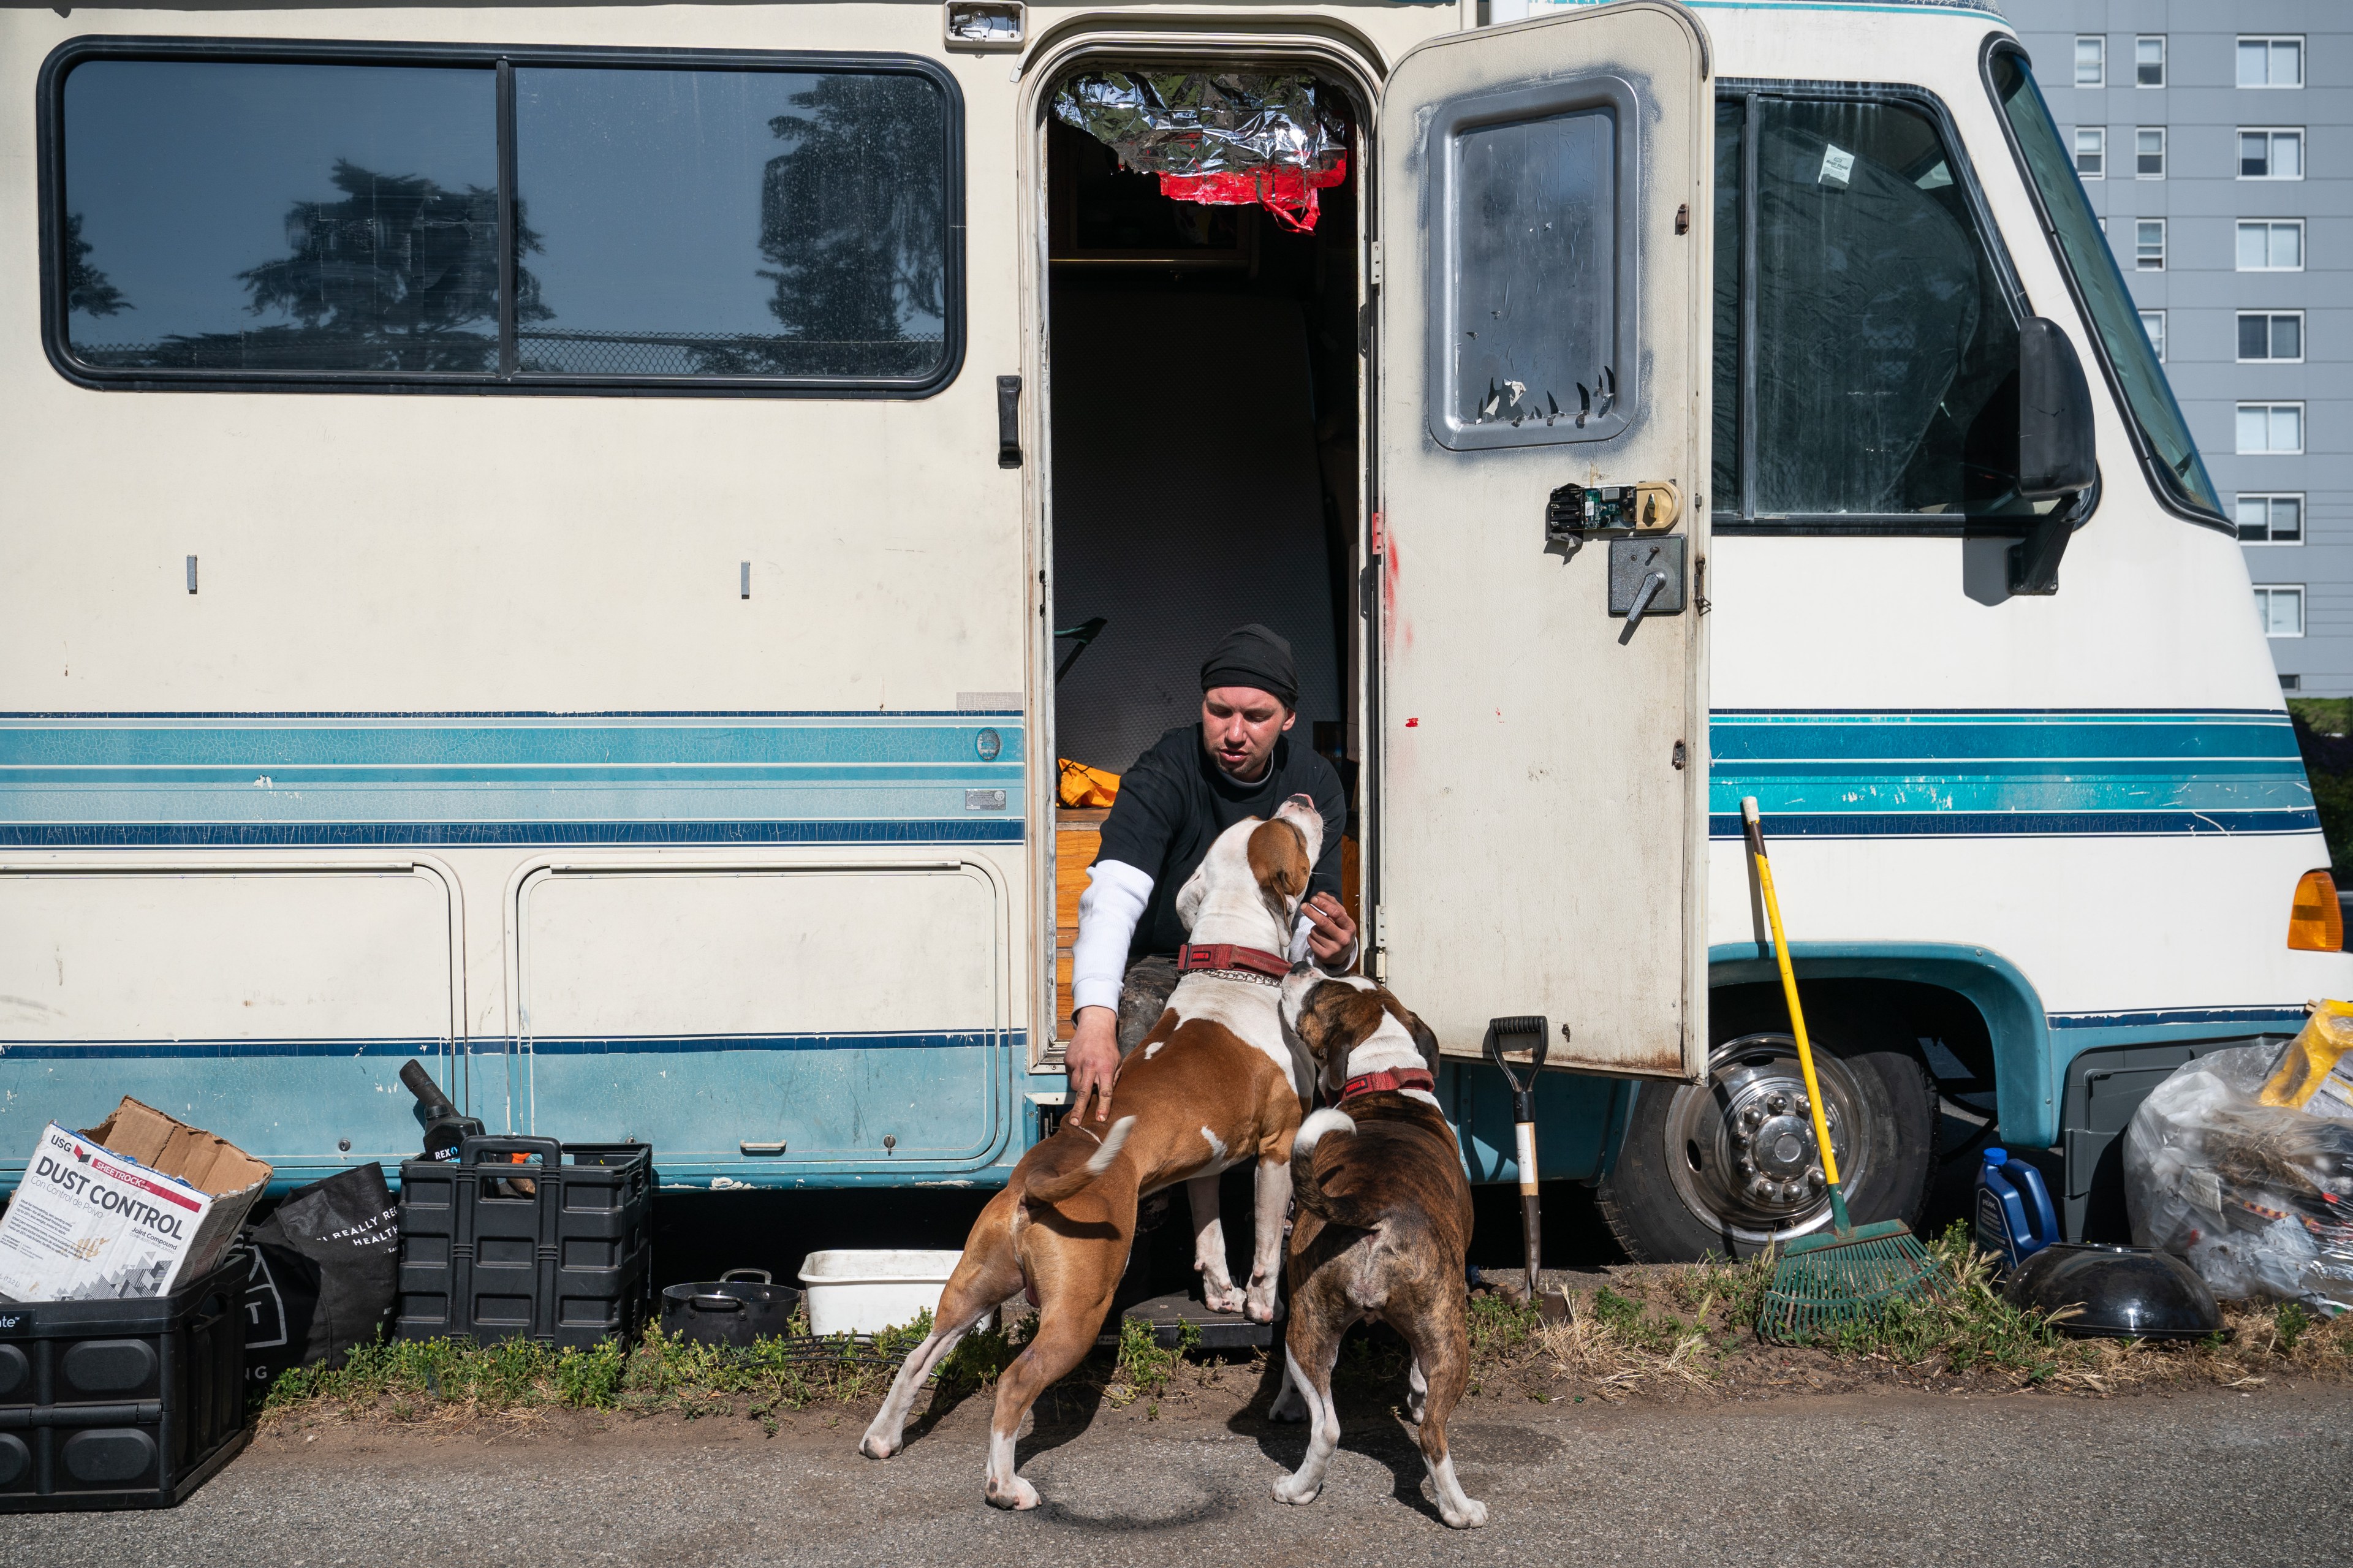 A person is crouching in the doorway of an RV, petting two eager dogs. The RV door is open, revealing some interior, and various items are scattered around outside.